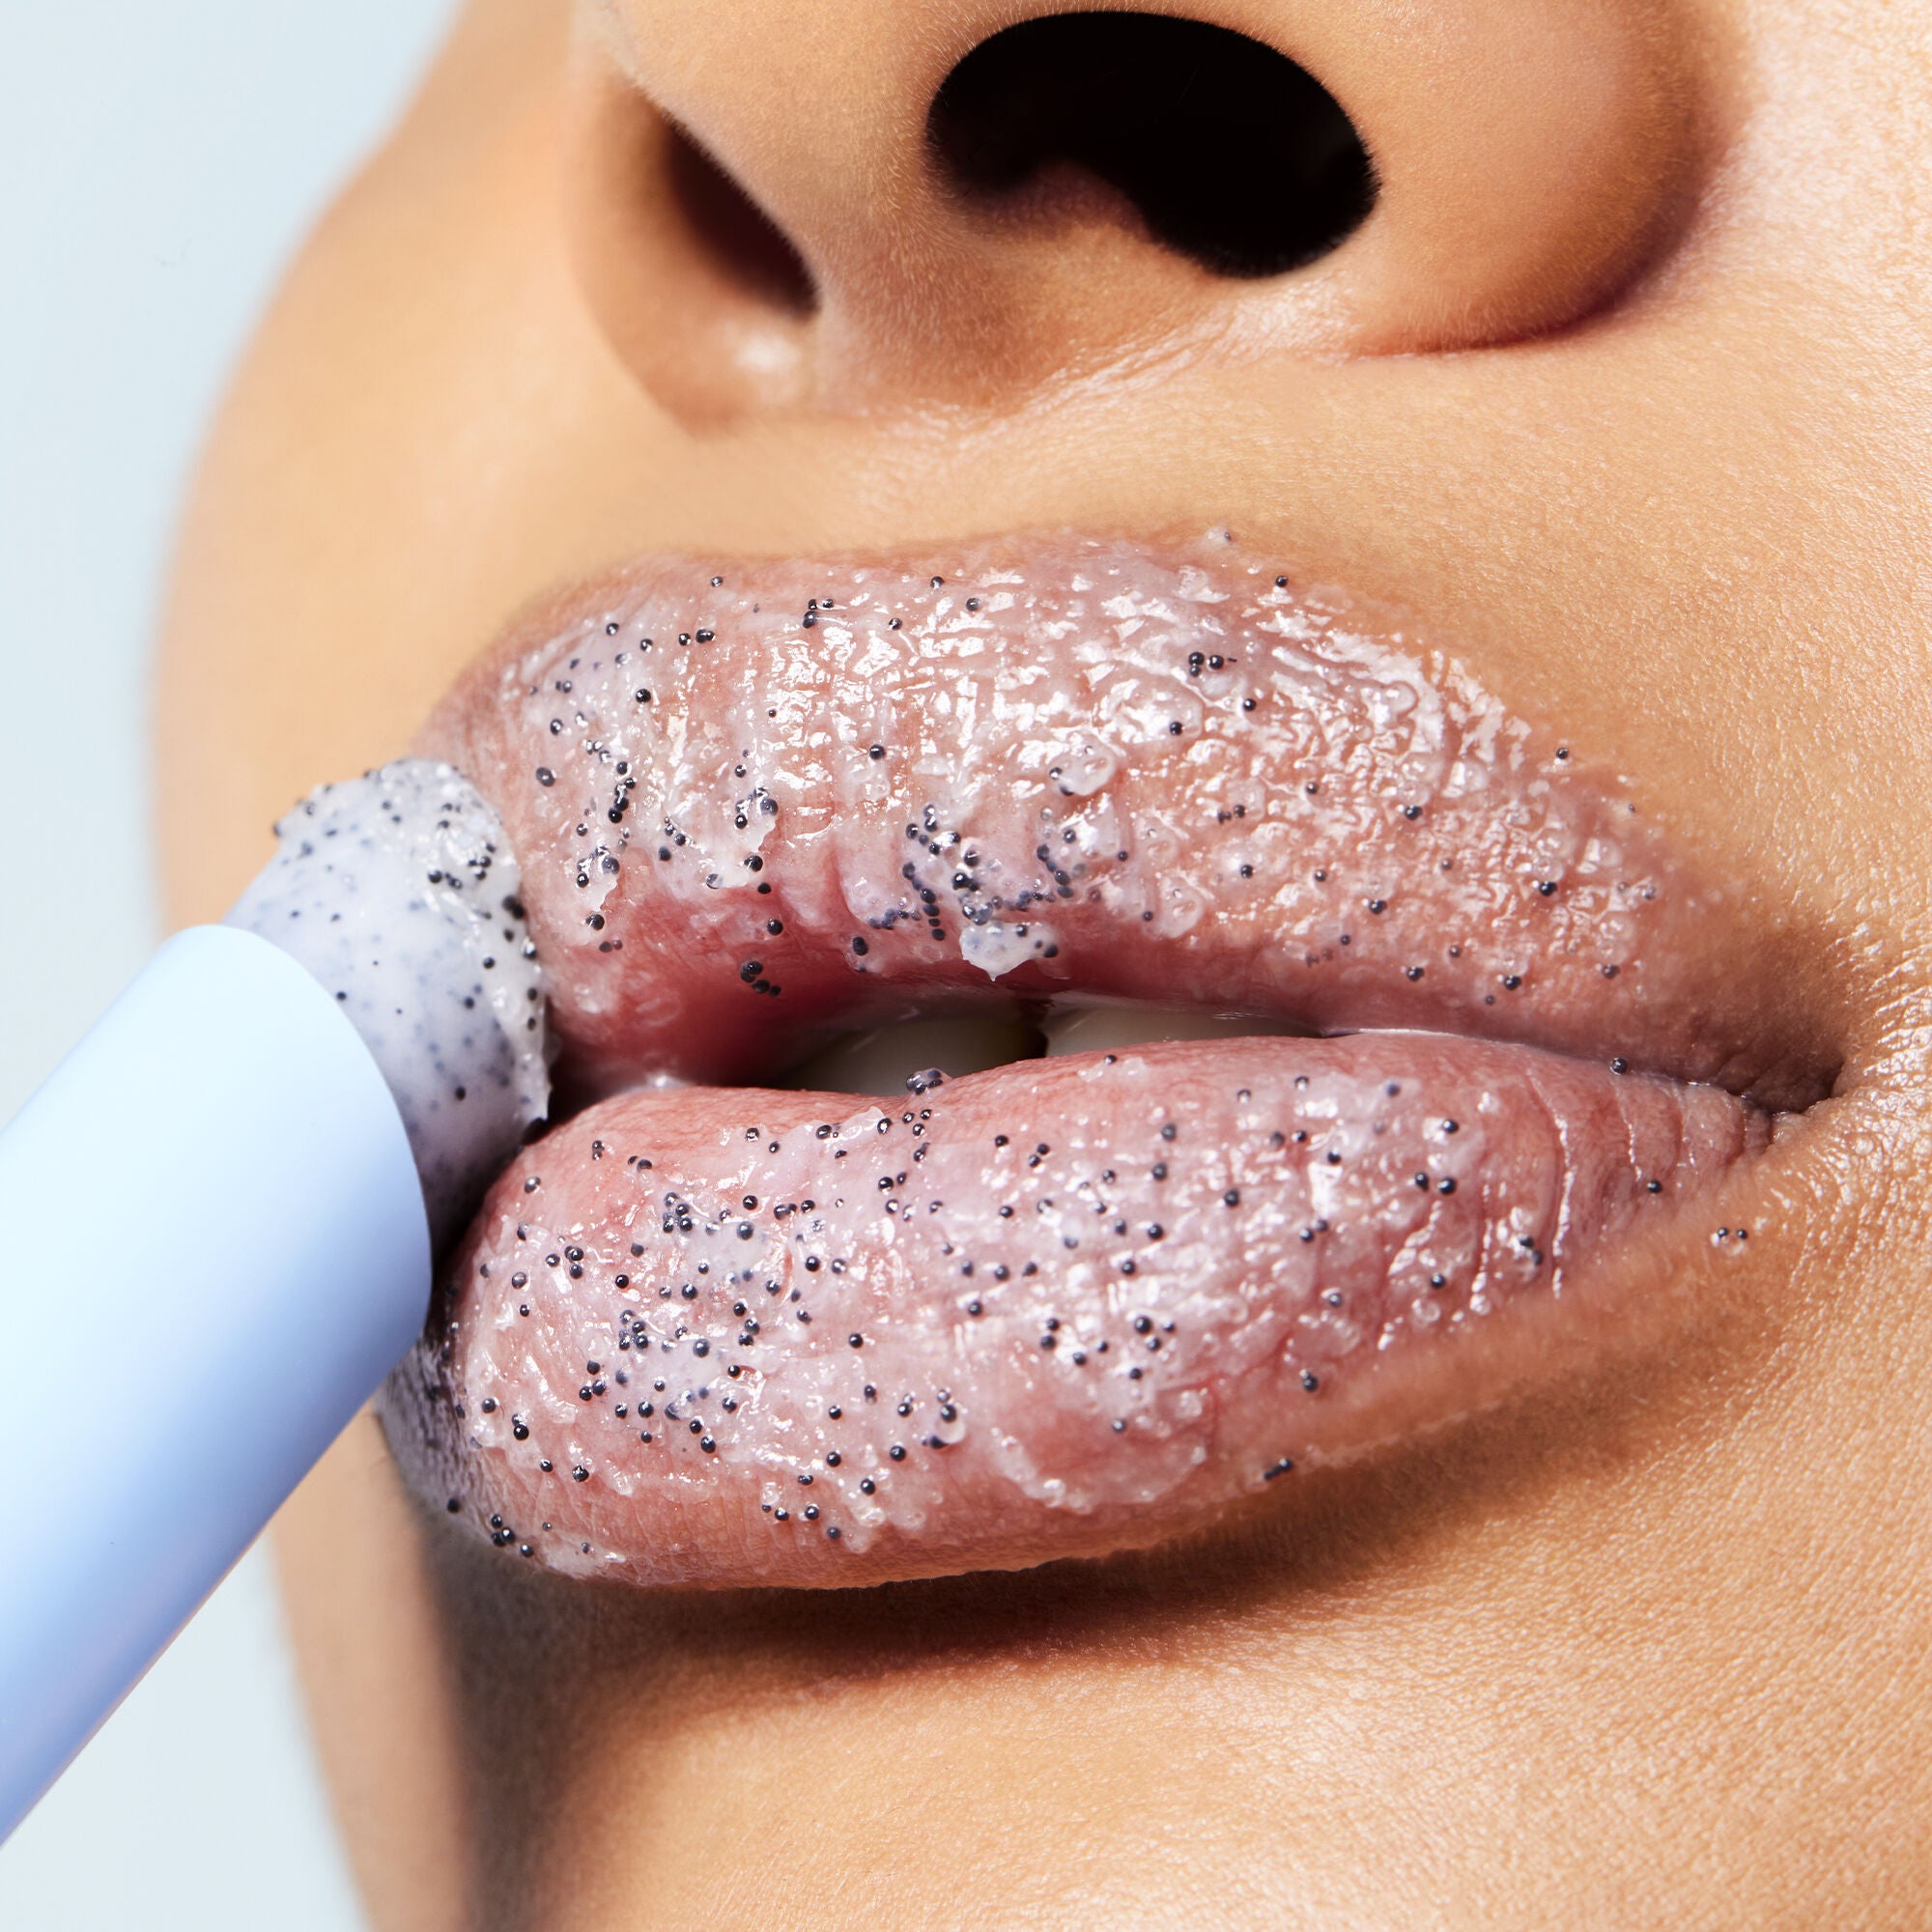 model applying cookies and cream inspired exfoliant in lipstick-like tube